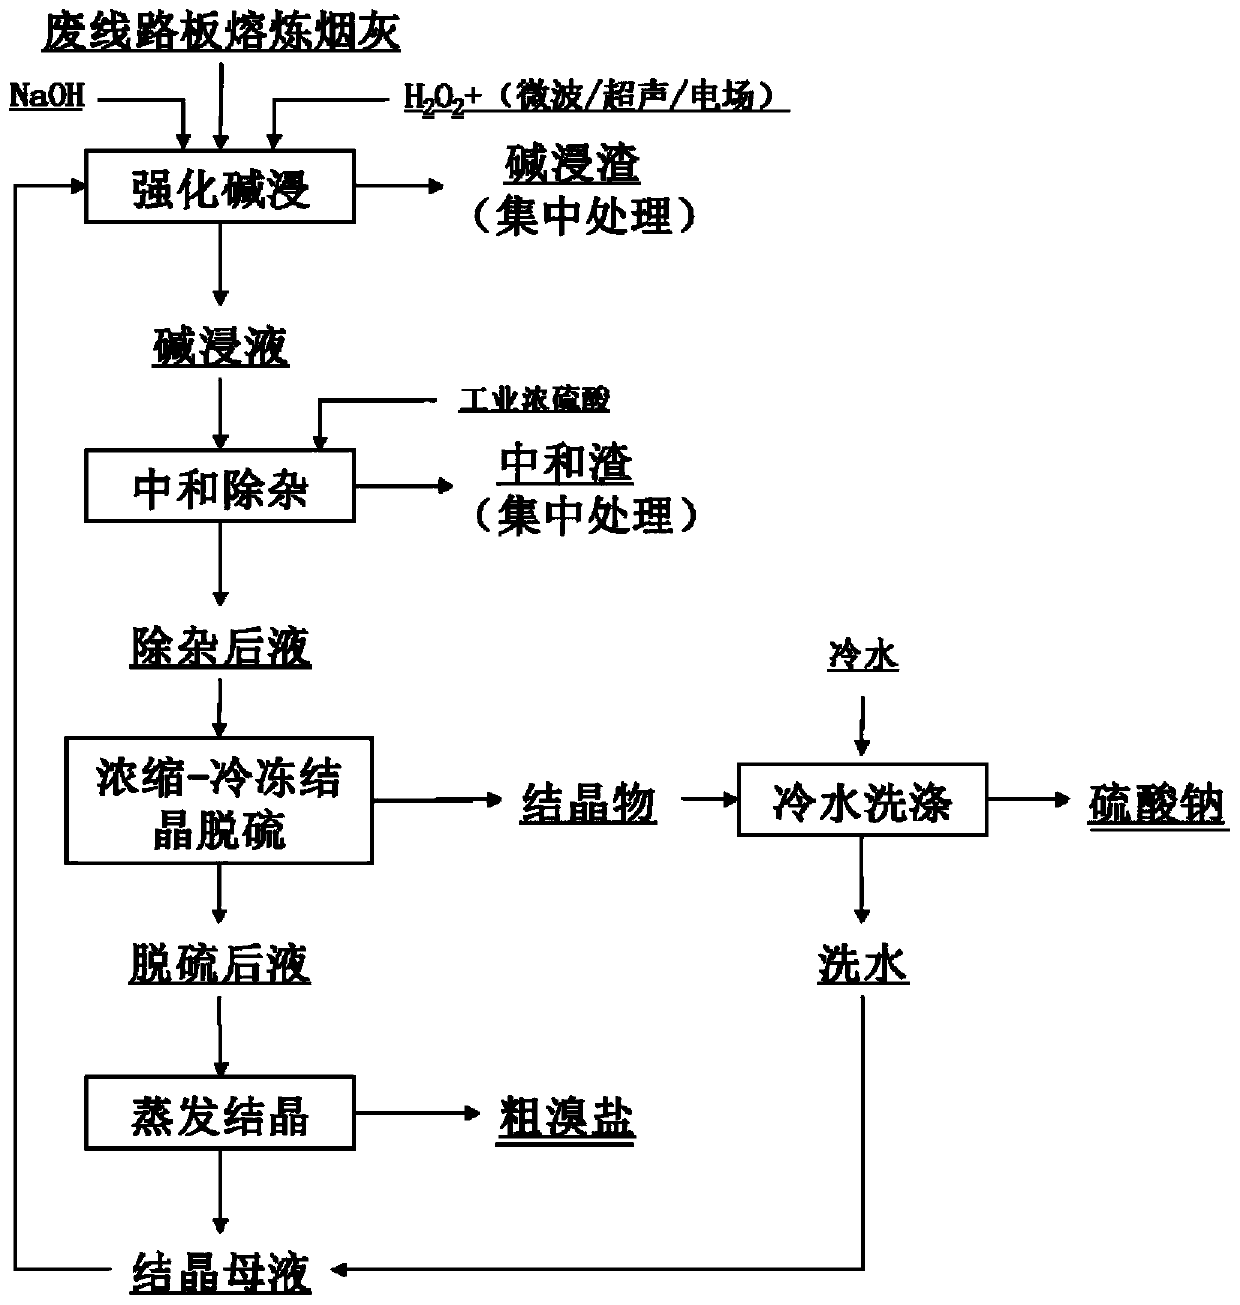 Waste circuit board smelting soot reinforced alkaline leaching debromination recovery method